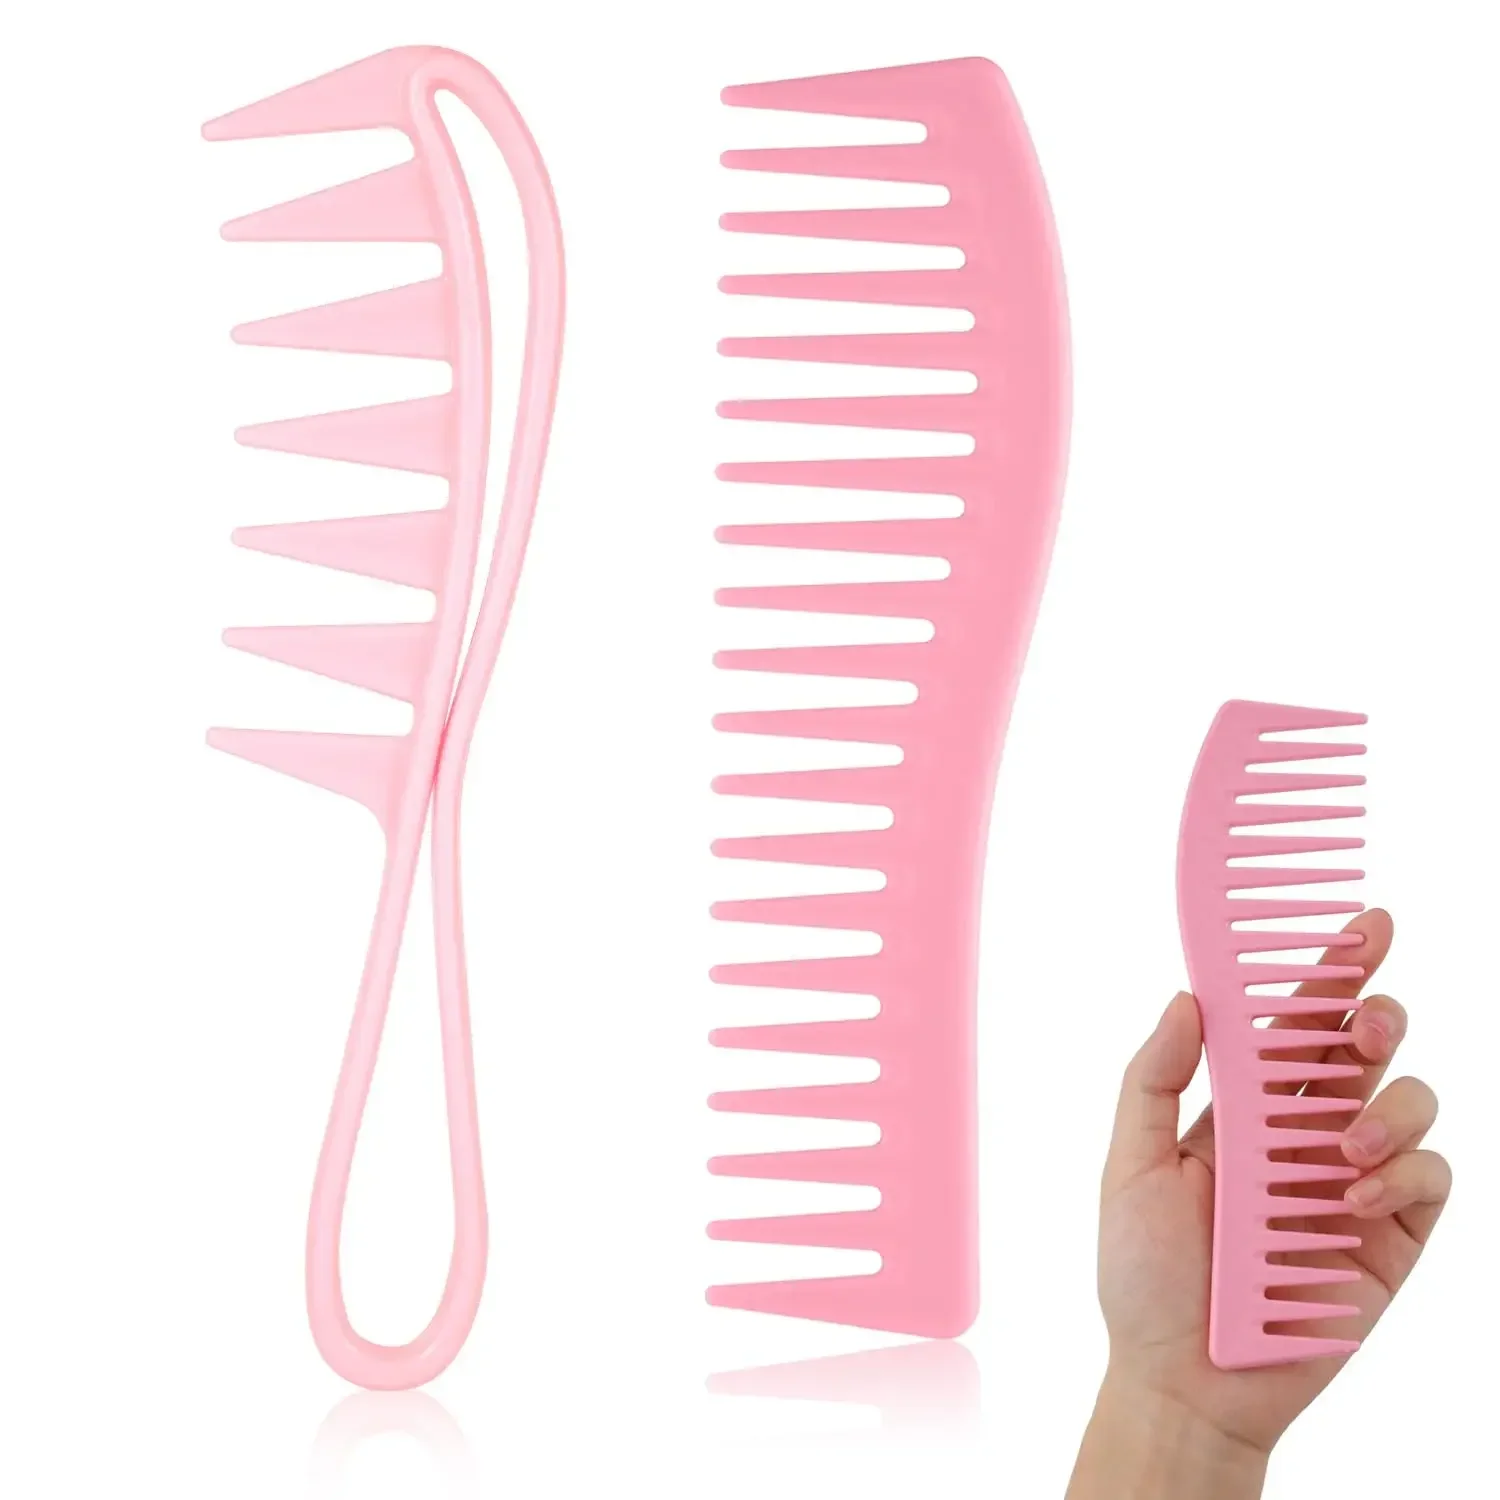 

2pcs Wide Tooth Combs for Hair Detangling Curly Wavy Straight Barber Salon Men Women Styling